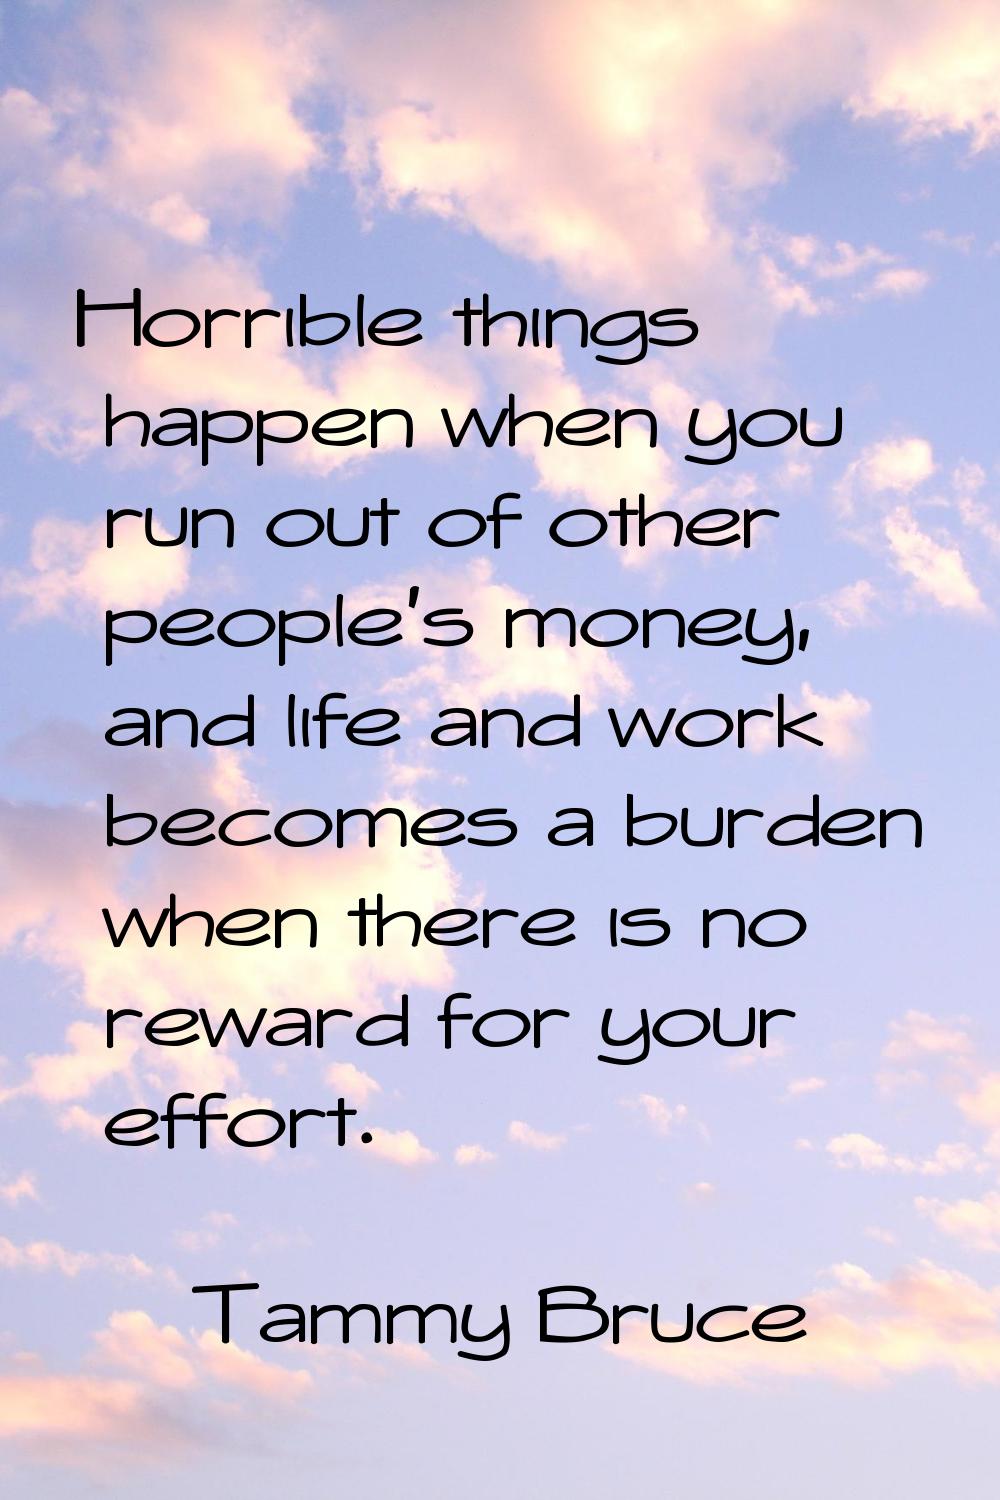 Horrible things happen when you run out of other people's money, and life and work becomes a burden